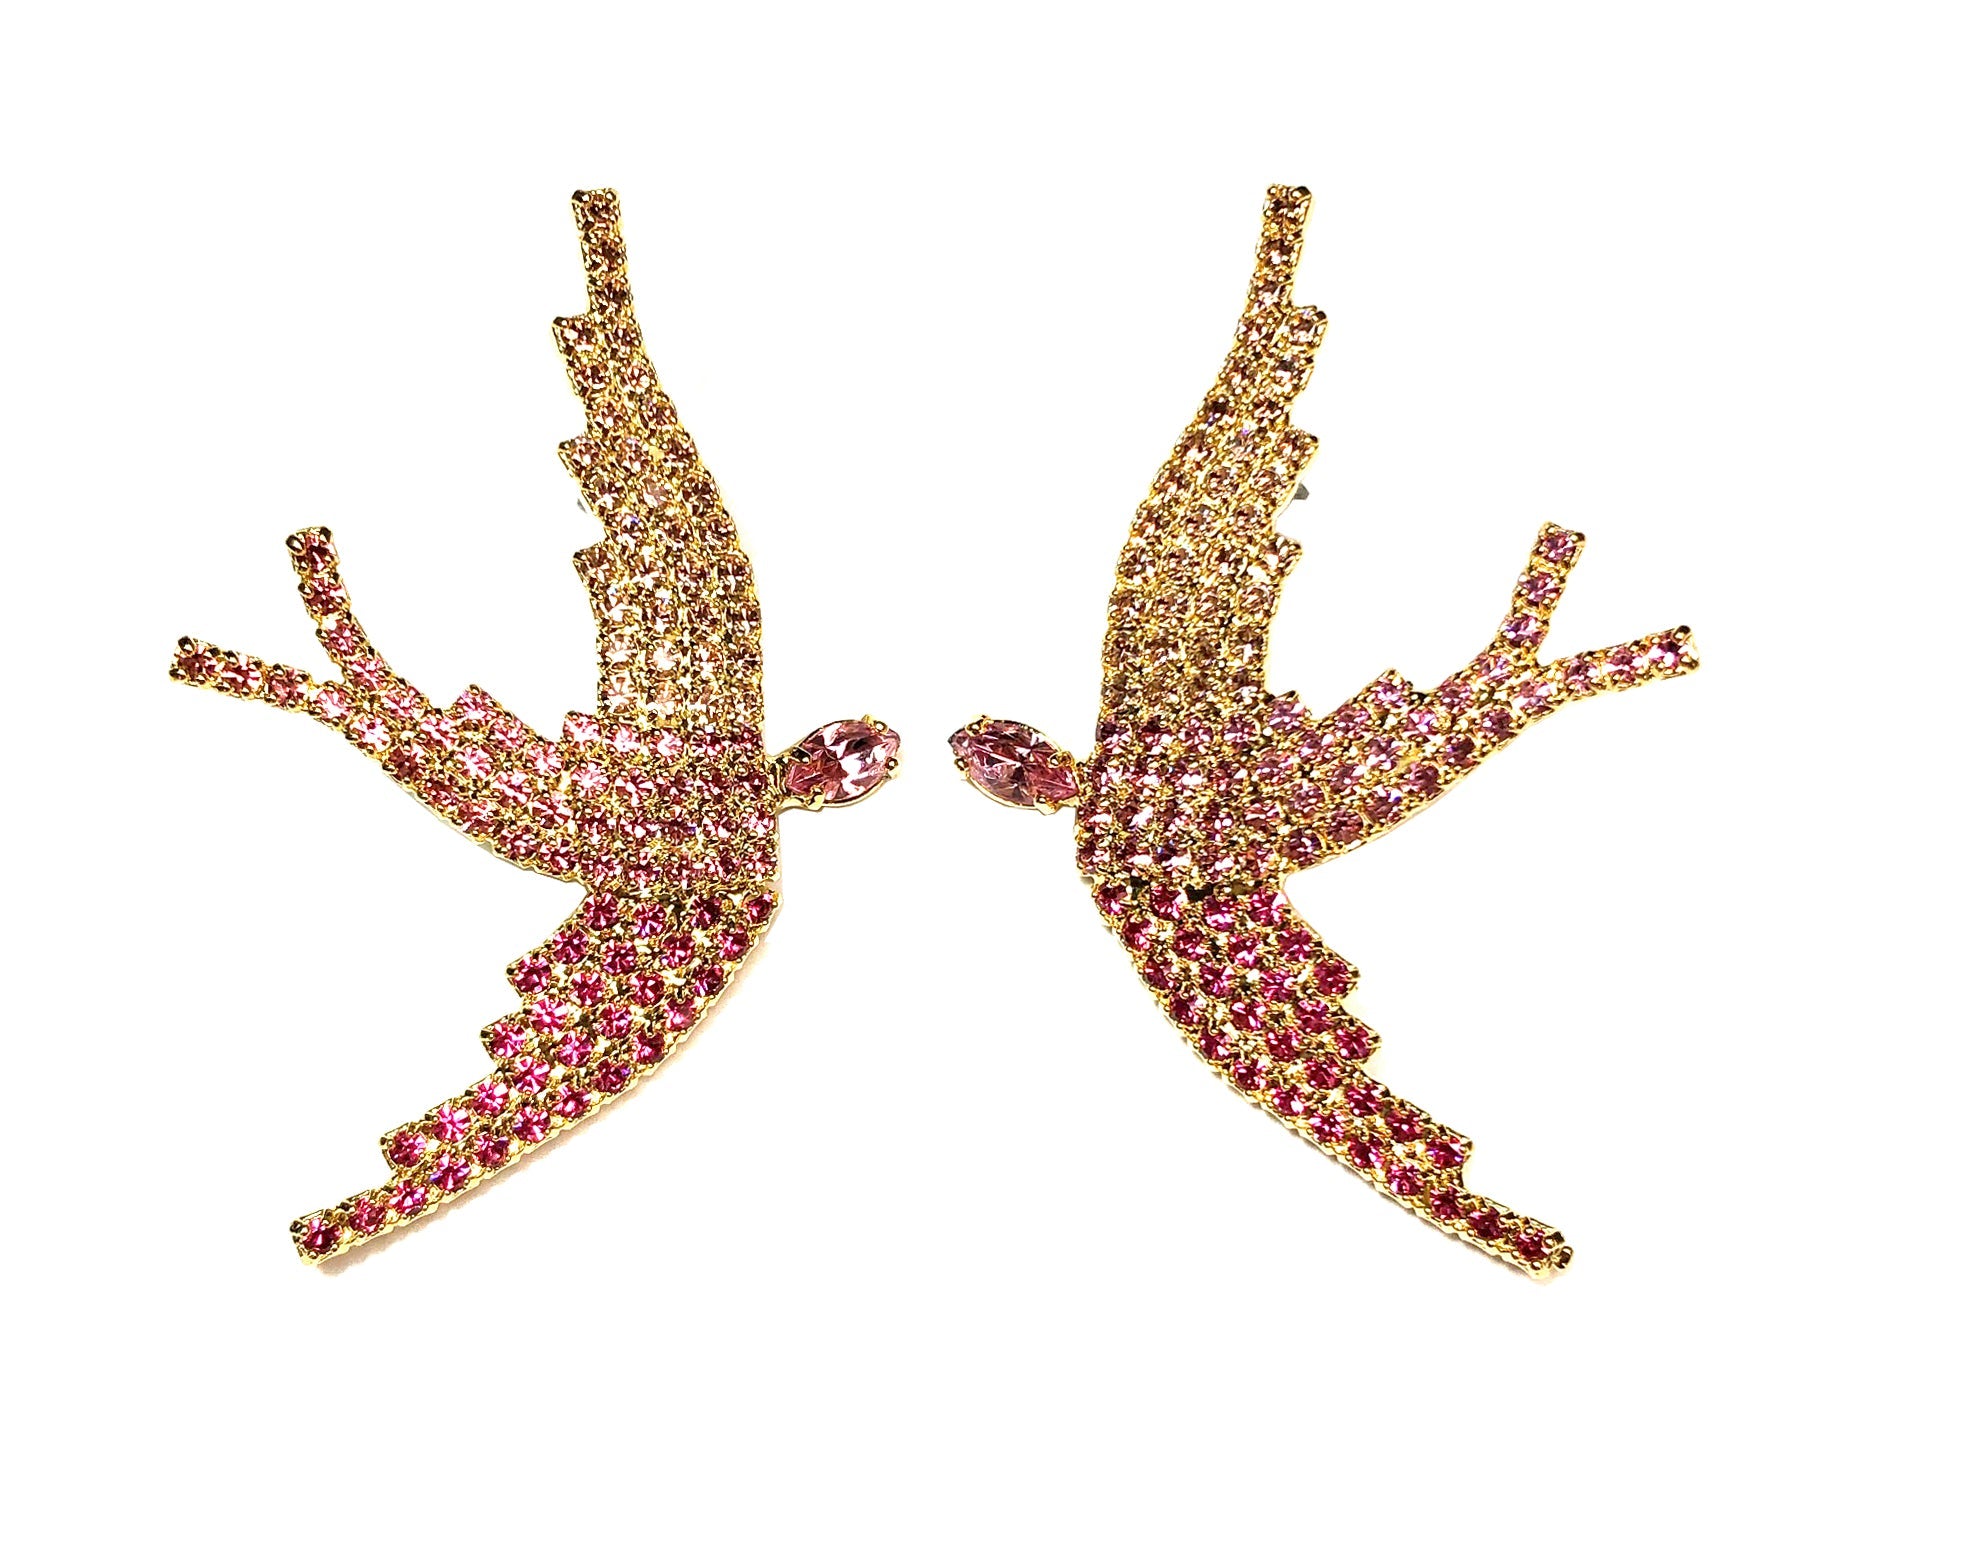 PINK OMBRE SWAROVSKI PHOENIX EARRINGS - Epona Valley | Luxury Hair Accessories | Bridal Accessories | Made In NYC